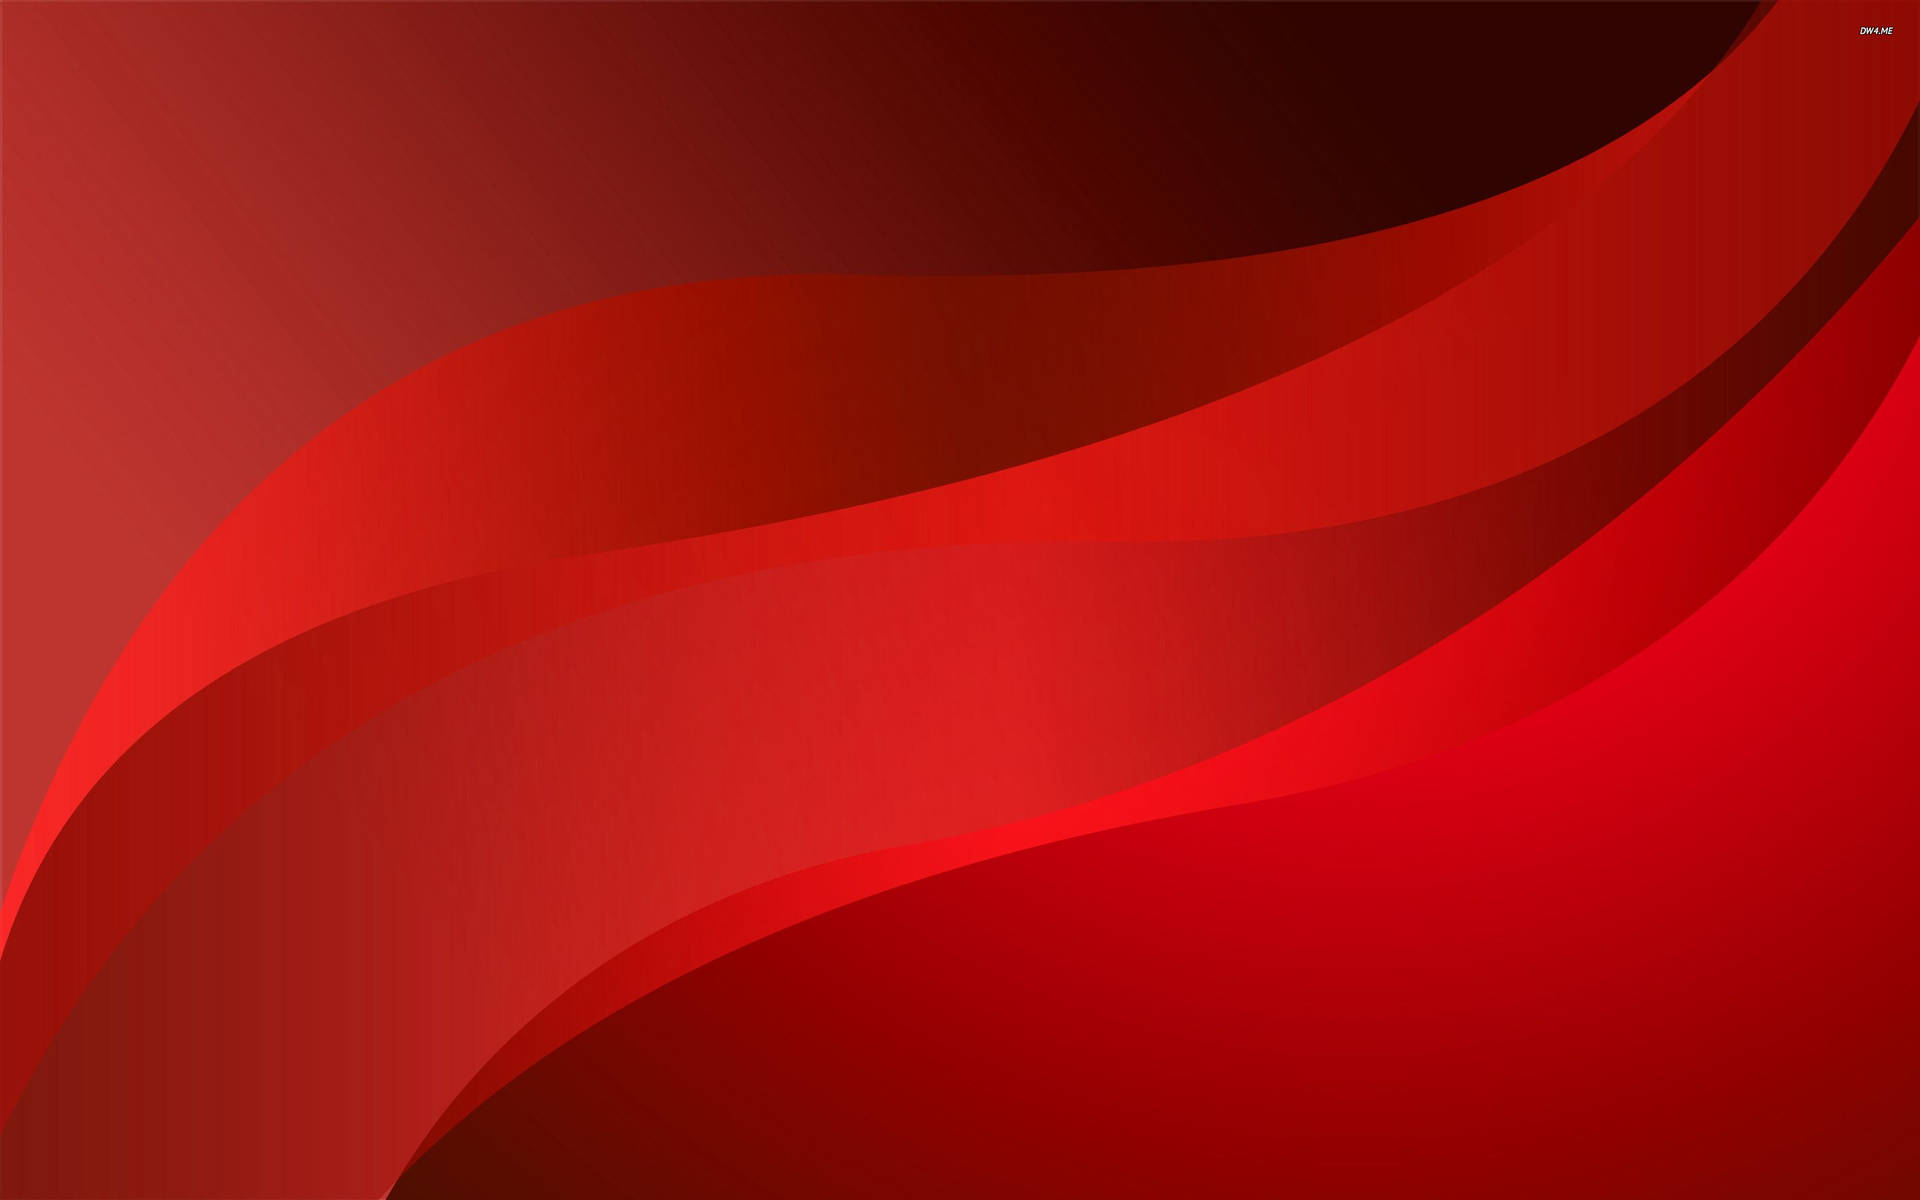 Abstract Abstract Red Lines Background Wallpaper